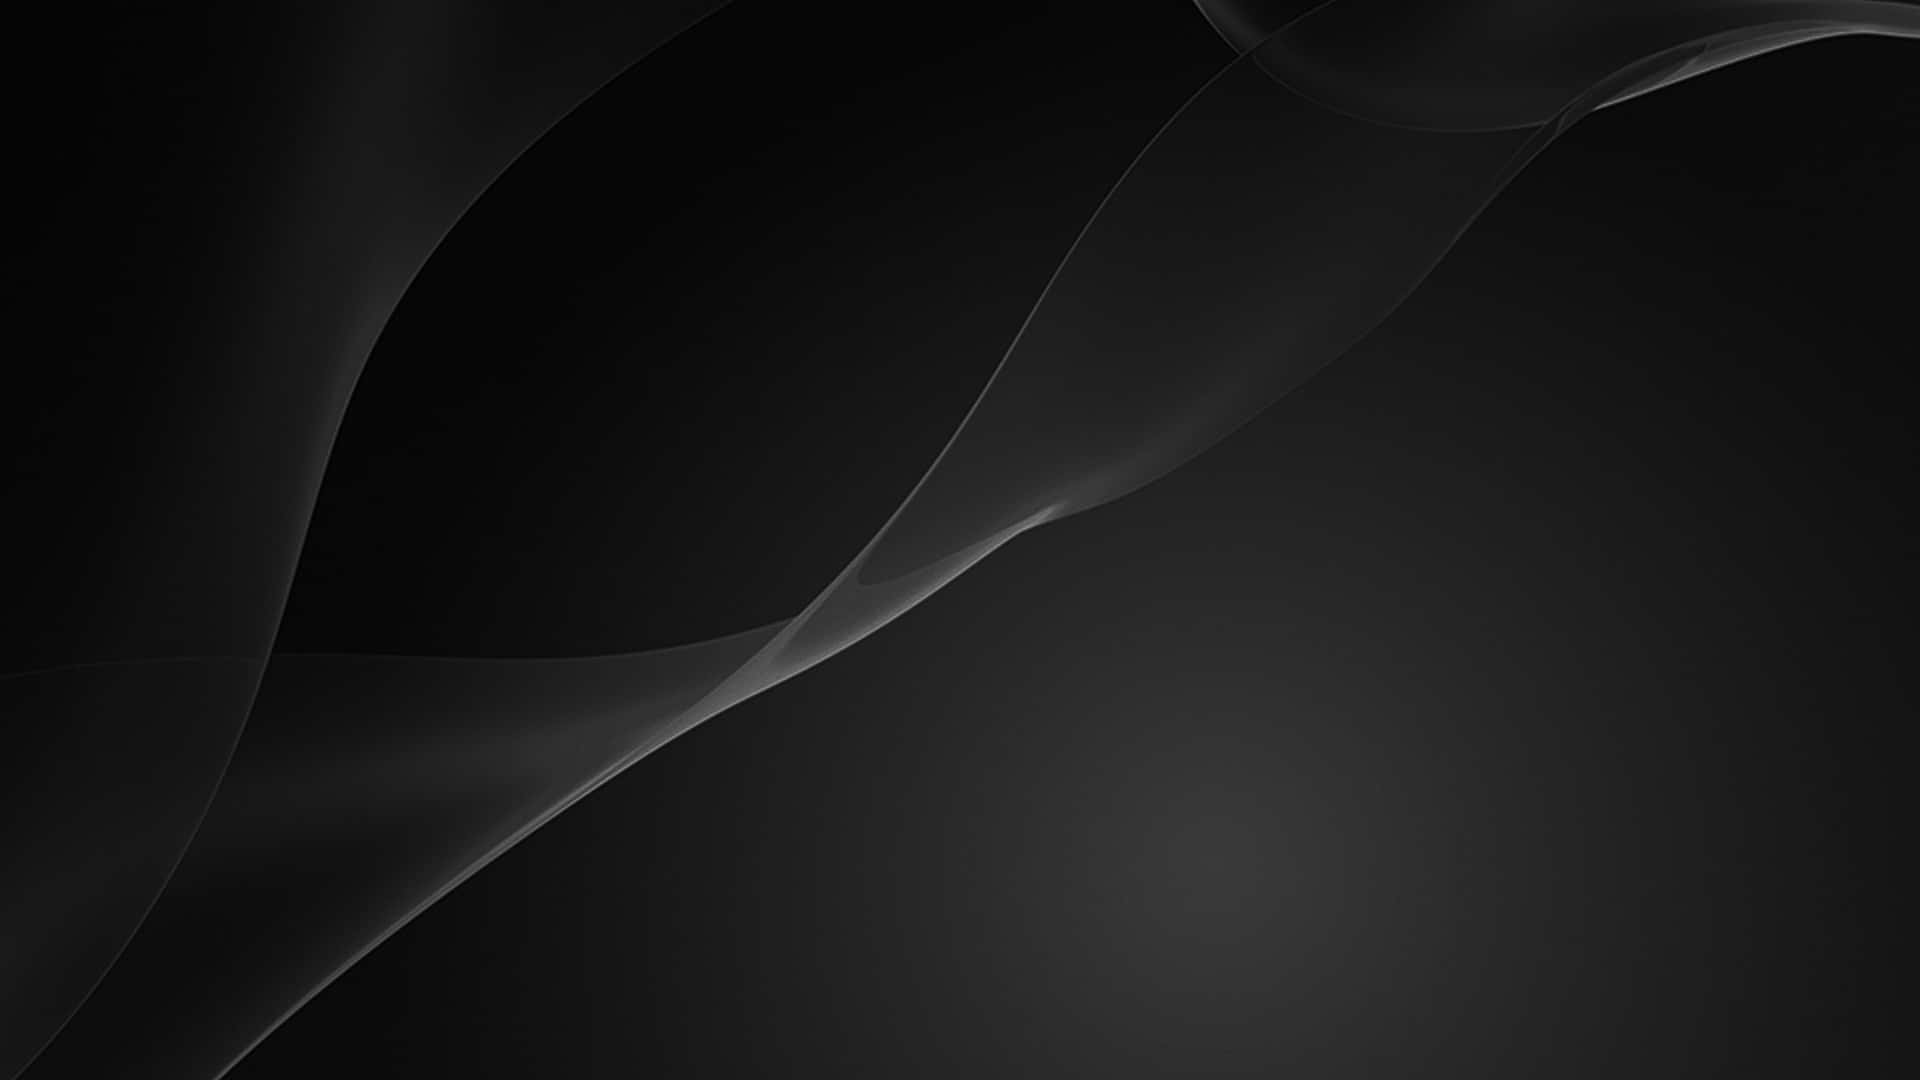 Mysterious and alluring dark abstract background